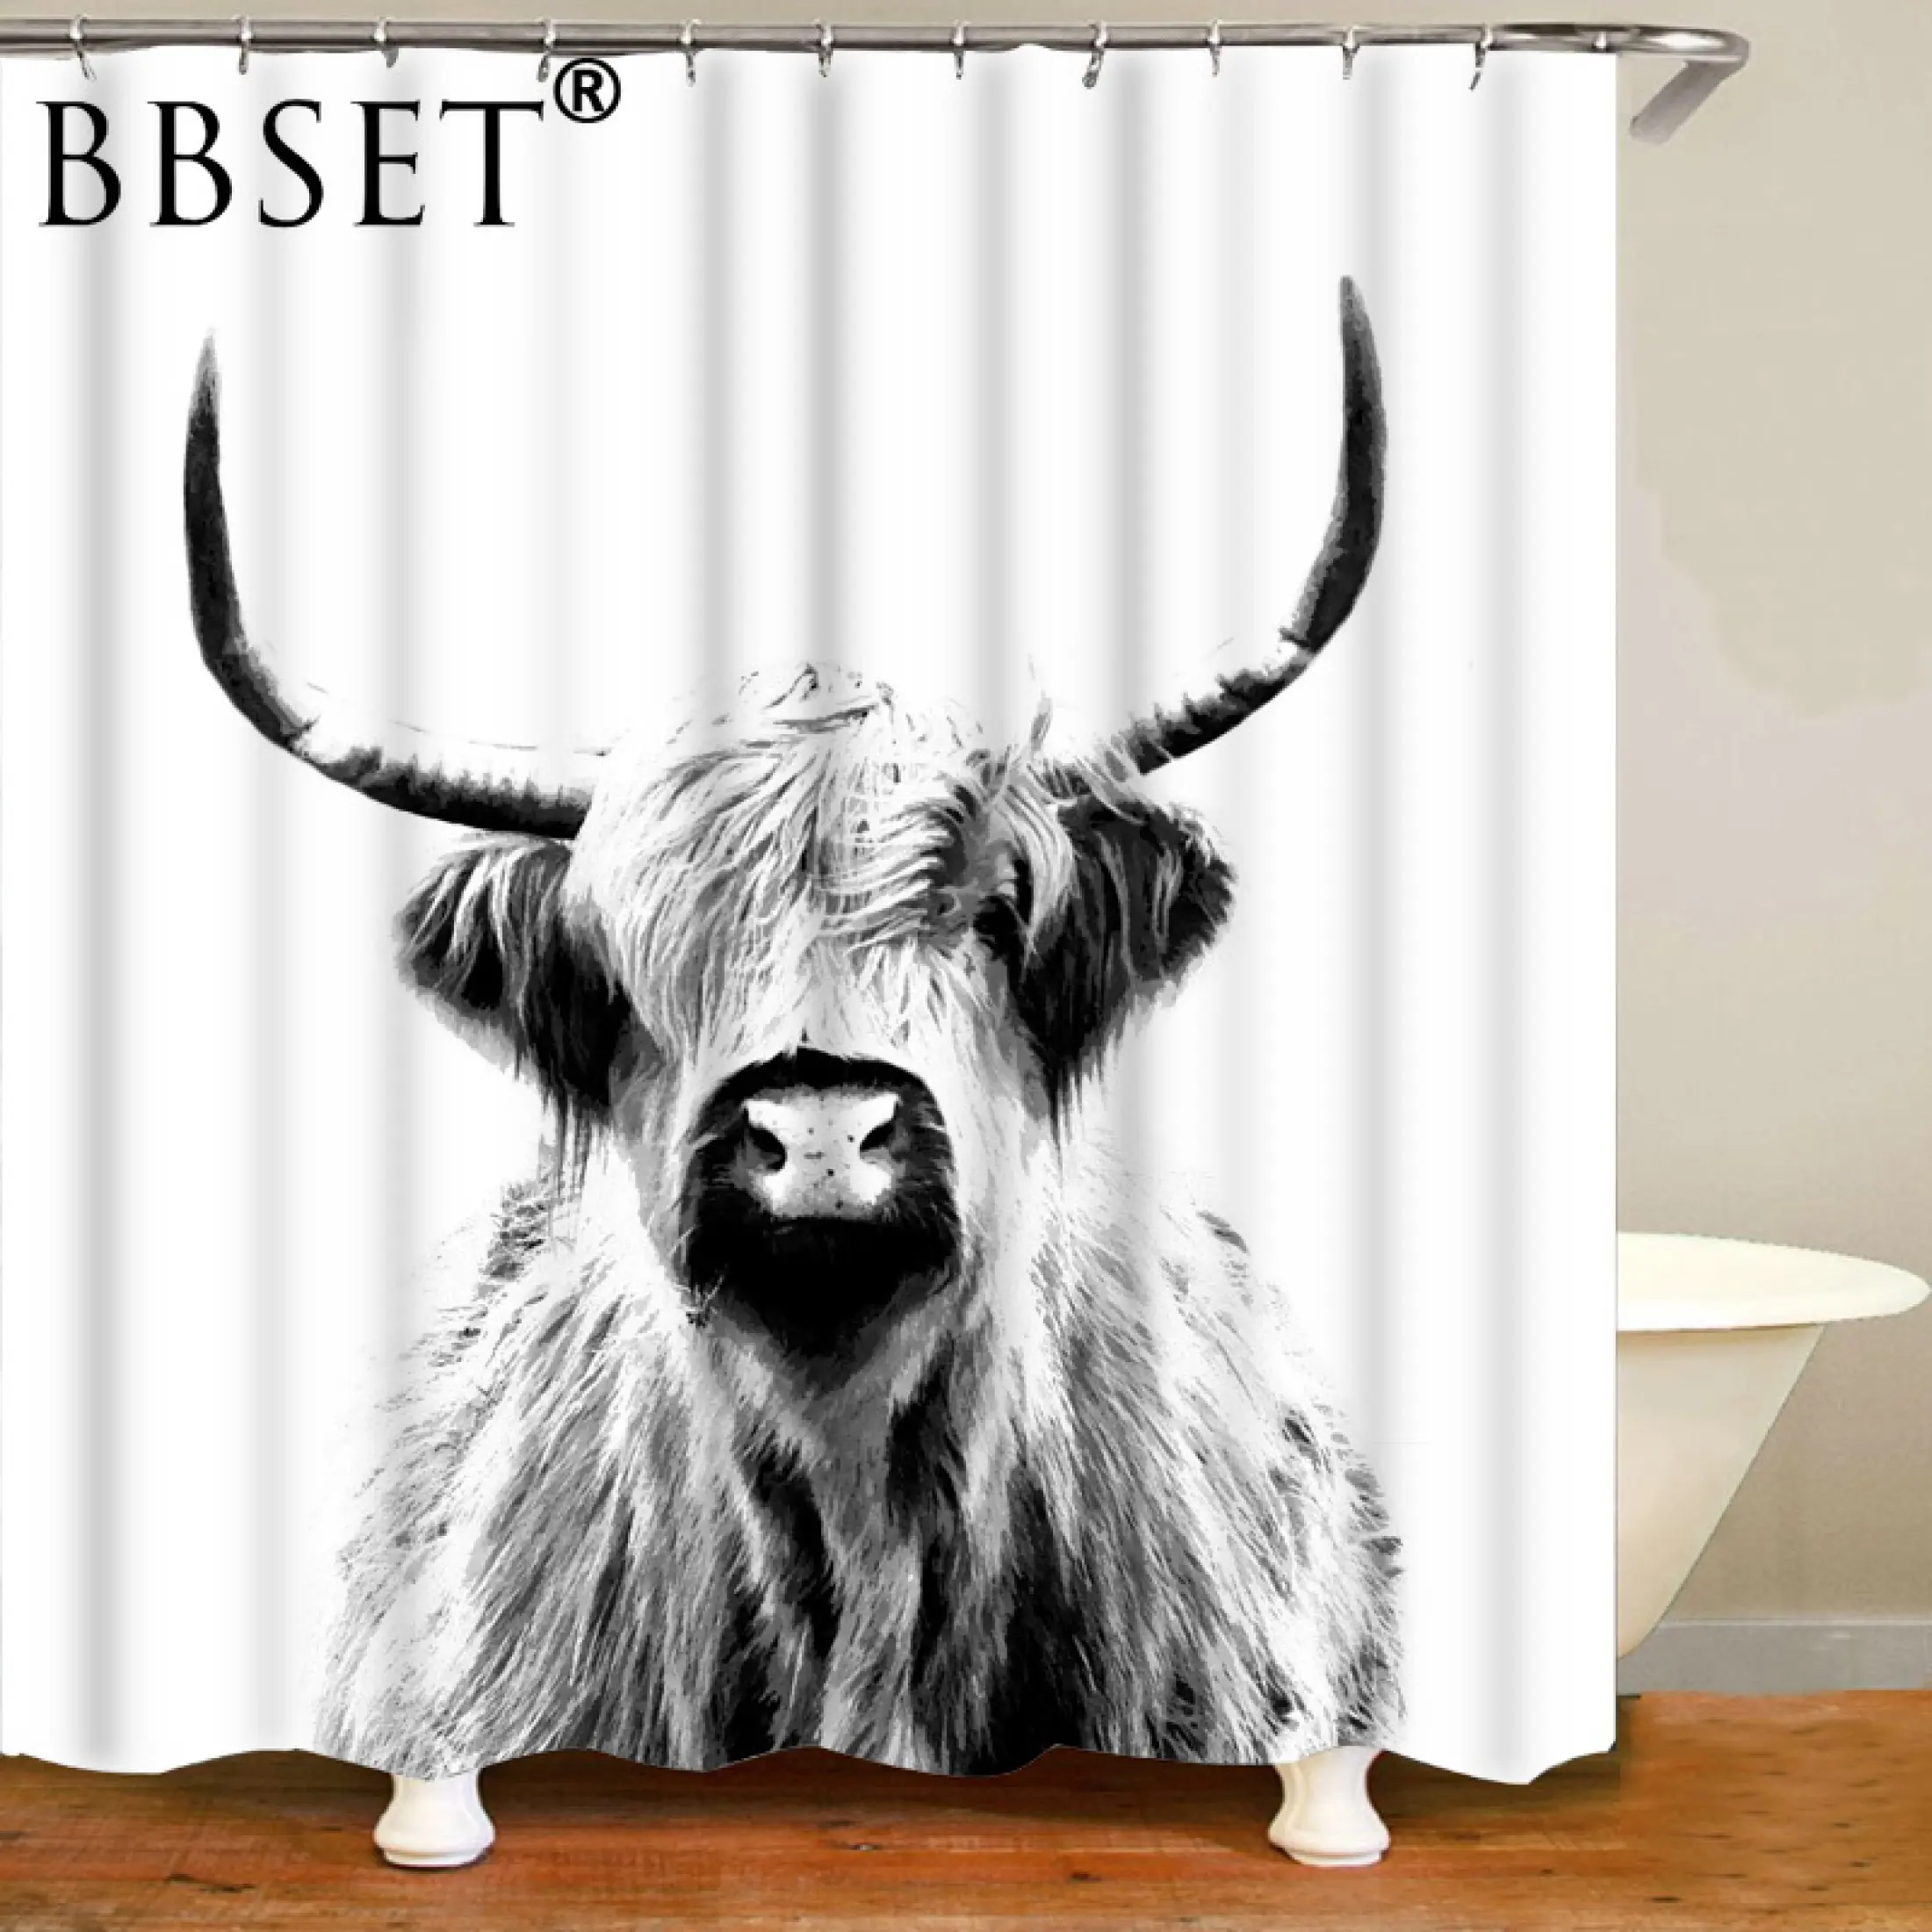 Animals Printed Shower Curtain, Cow Print Shower Curtain